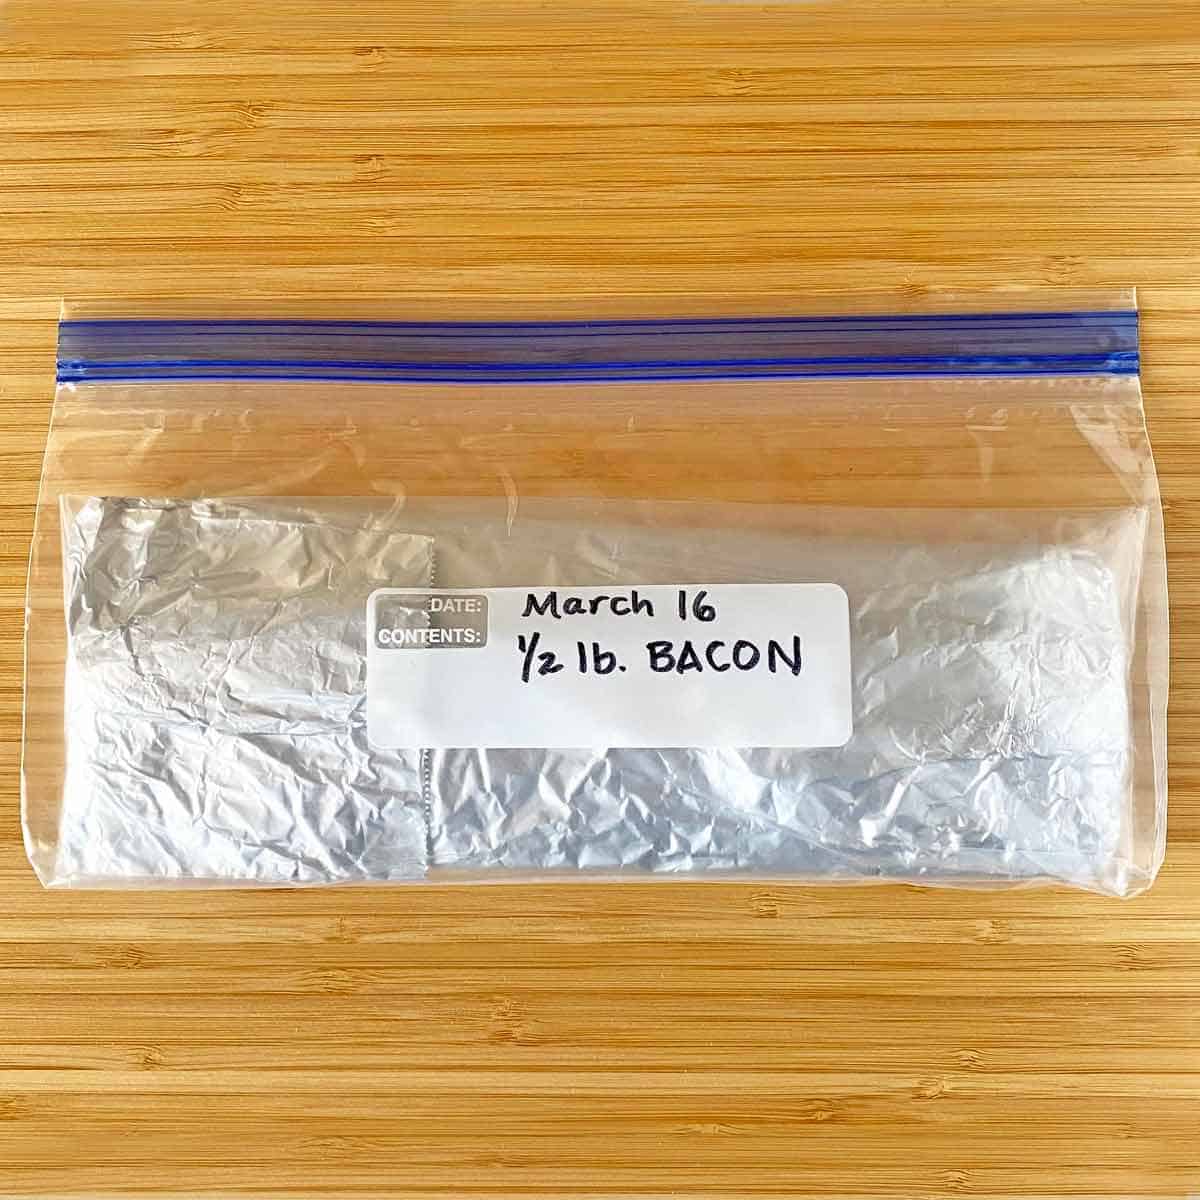 An open package of bacon triple wrapped and ready for the fridge or freezer.